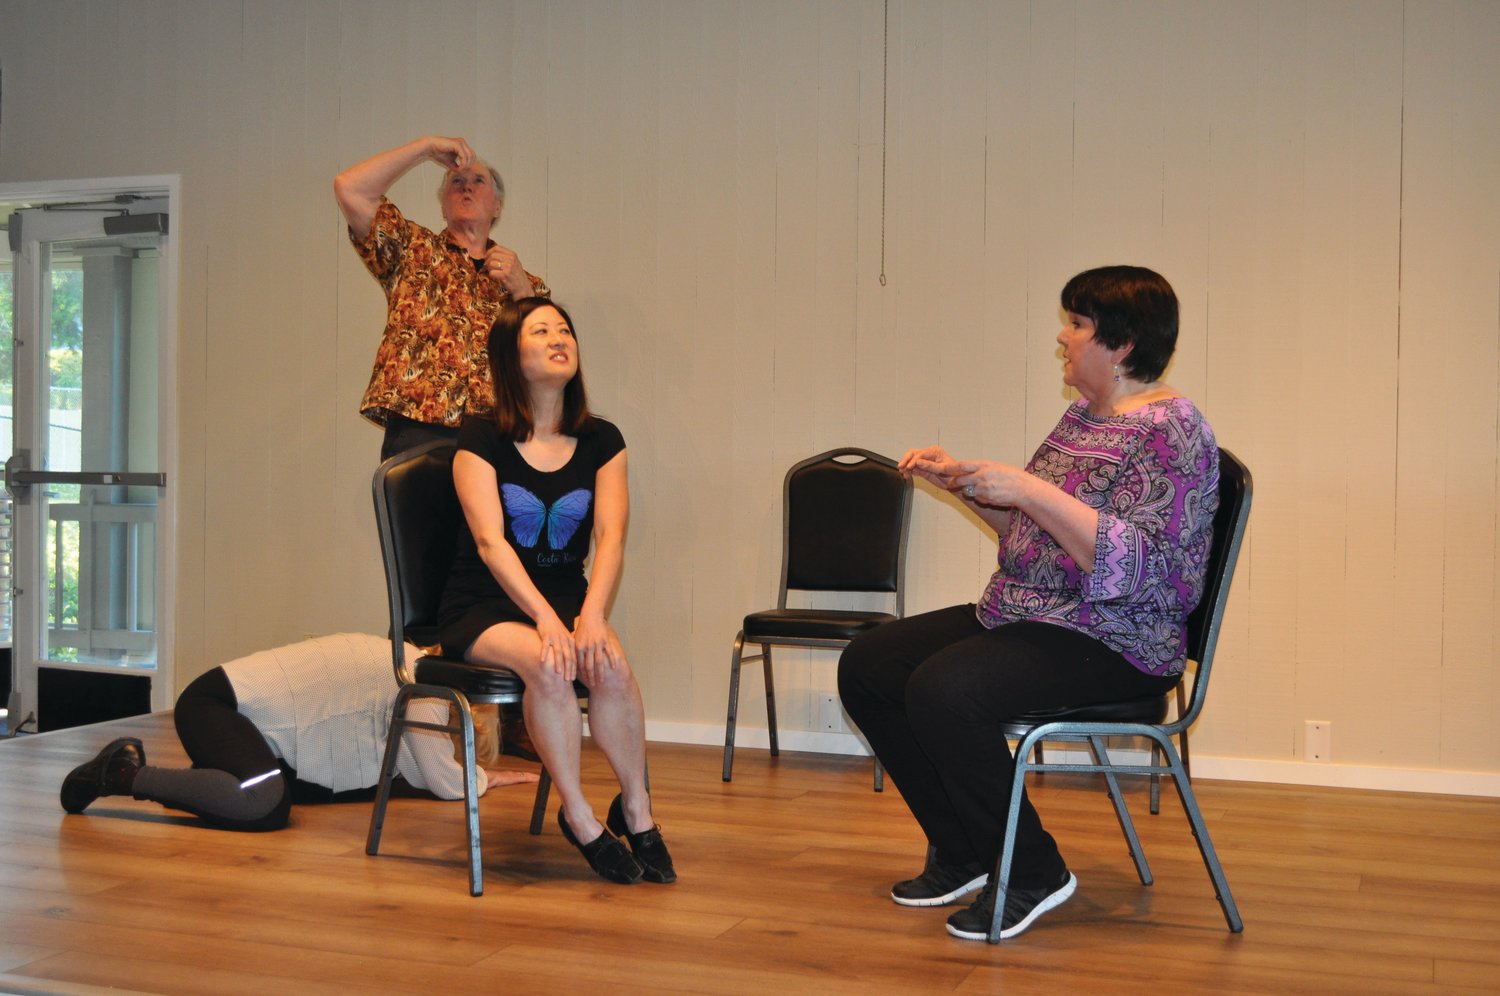 Madelyn Curll (floor), David Johnson, Karen Ni, and Nancy Peterson play “Fortune Teller,” a guessing game in which Peterson, the fortune teller, predicts future events in Ni’s life as suggested by the audience and conveyed by the two spirits, Curll and Johnson.